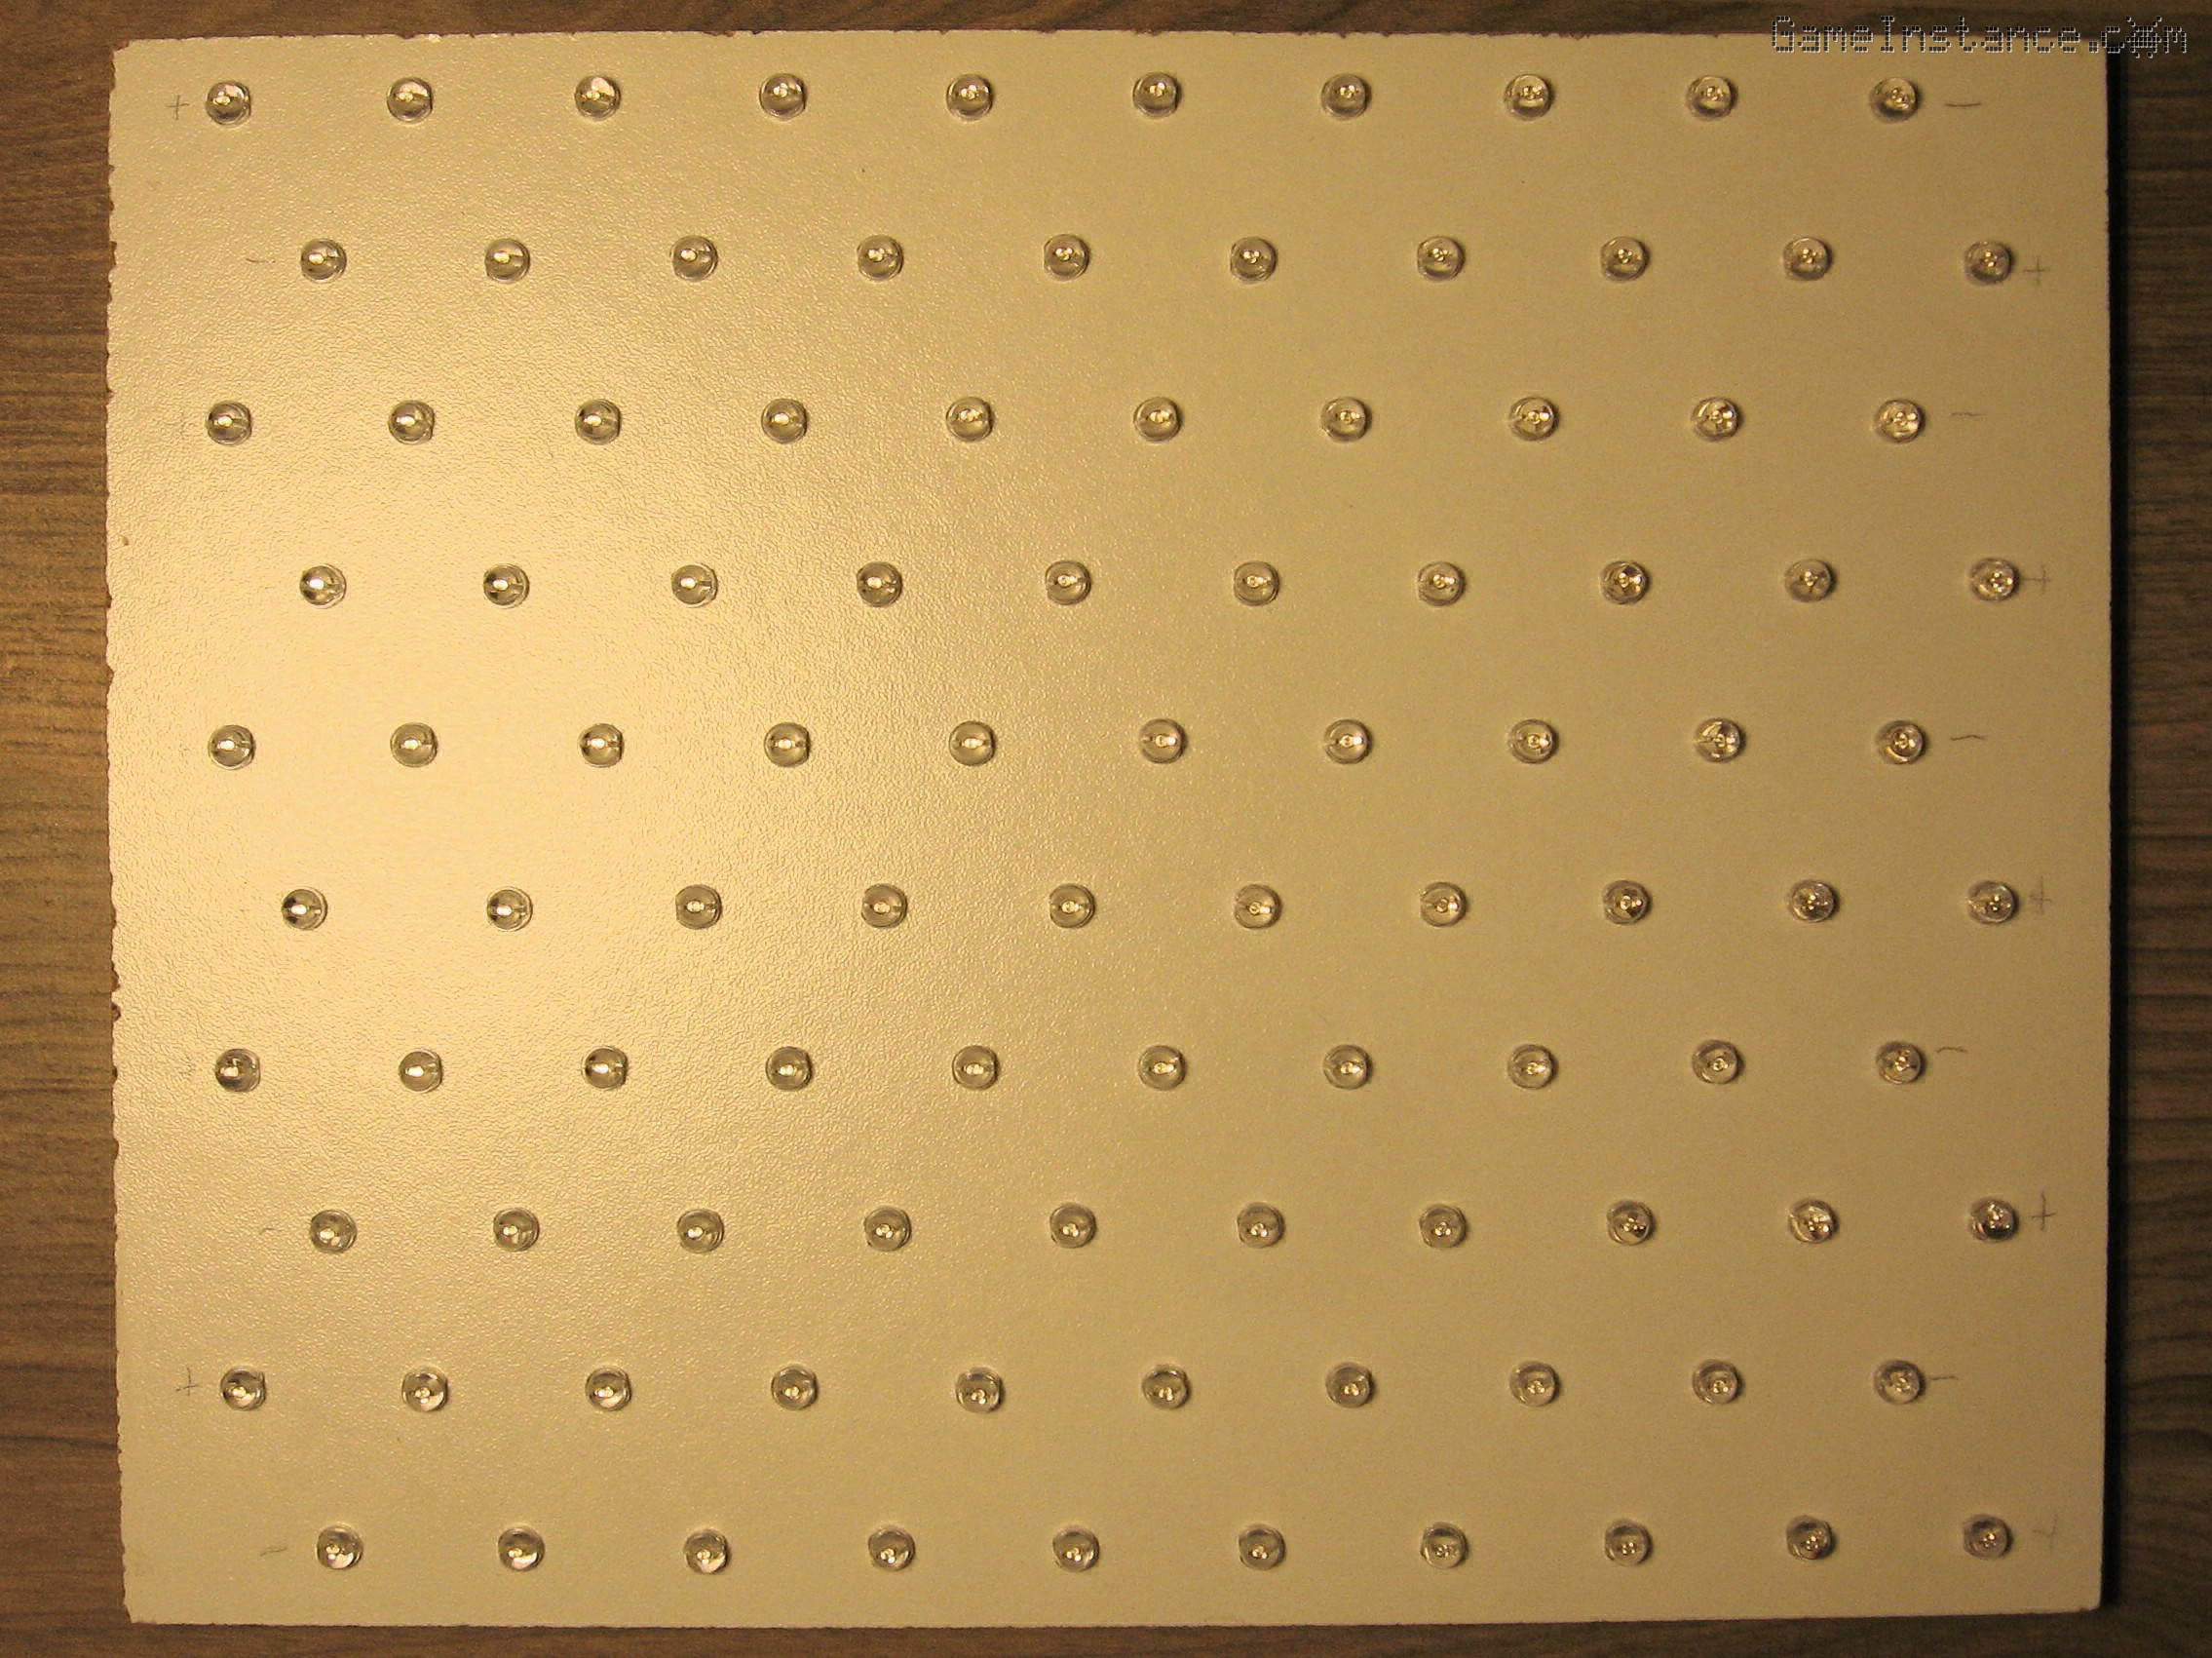 UV-Box - 100 UV LEDs placed in a triangular pattern on one of the exposure boards.